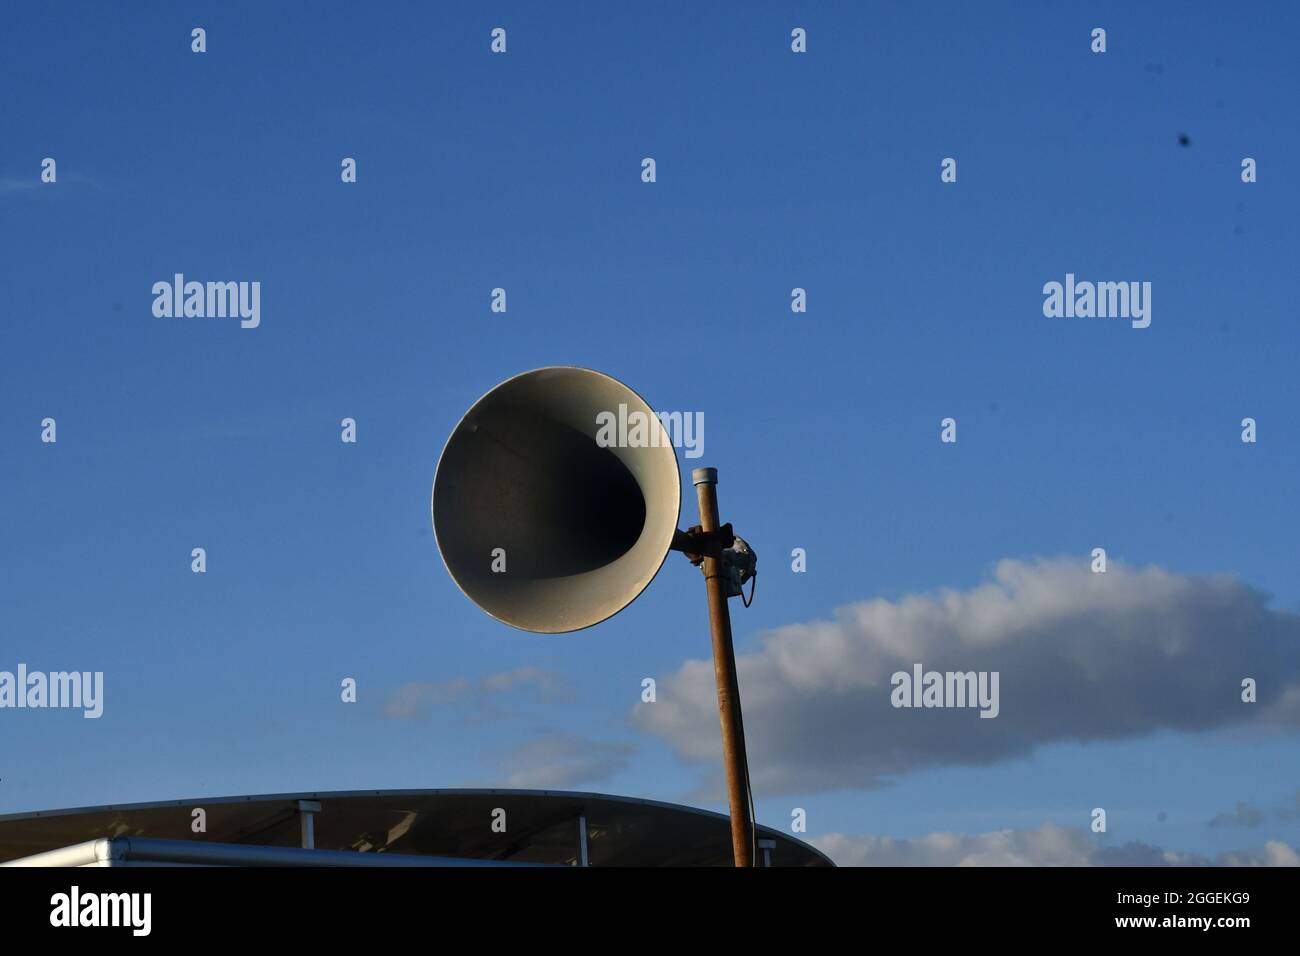 An old, retro style megaphone with the backdrop of a blue sky with shaded clouds Stock Photo